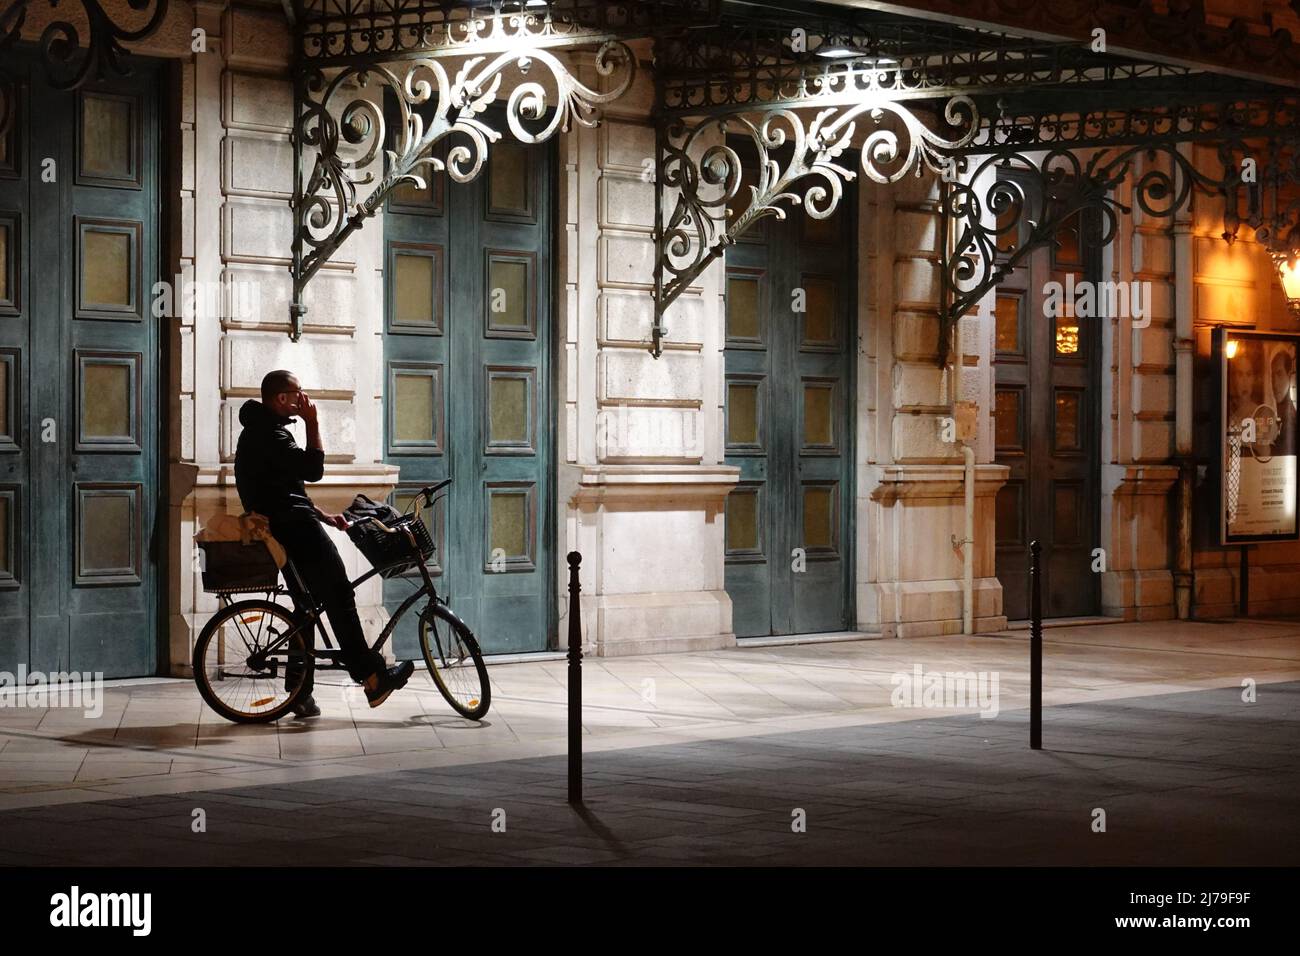 Nizza, ein Mann mit Mobiltelefon am Fahrrad vor der Oper // Nice, a man in front of the Opera House, sitting on a bicycle, using mobile phone Stock Photo